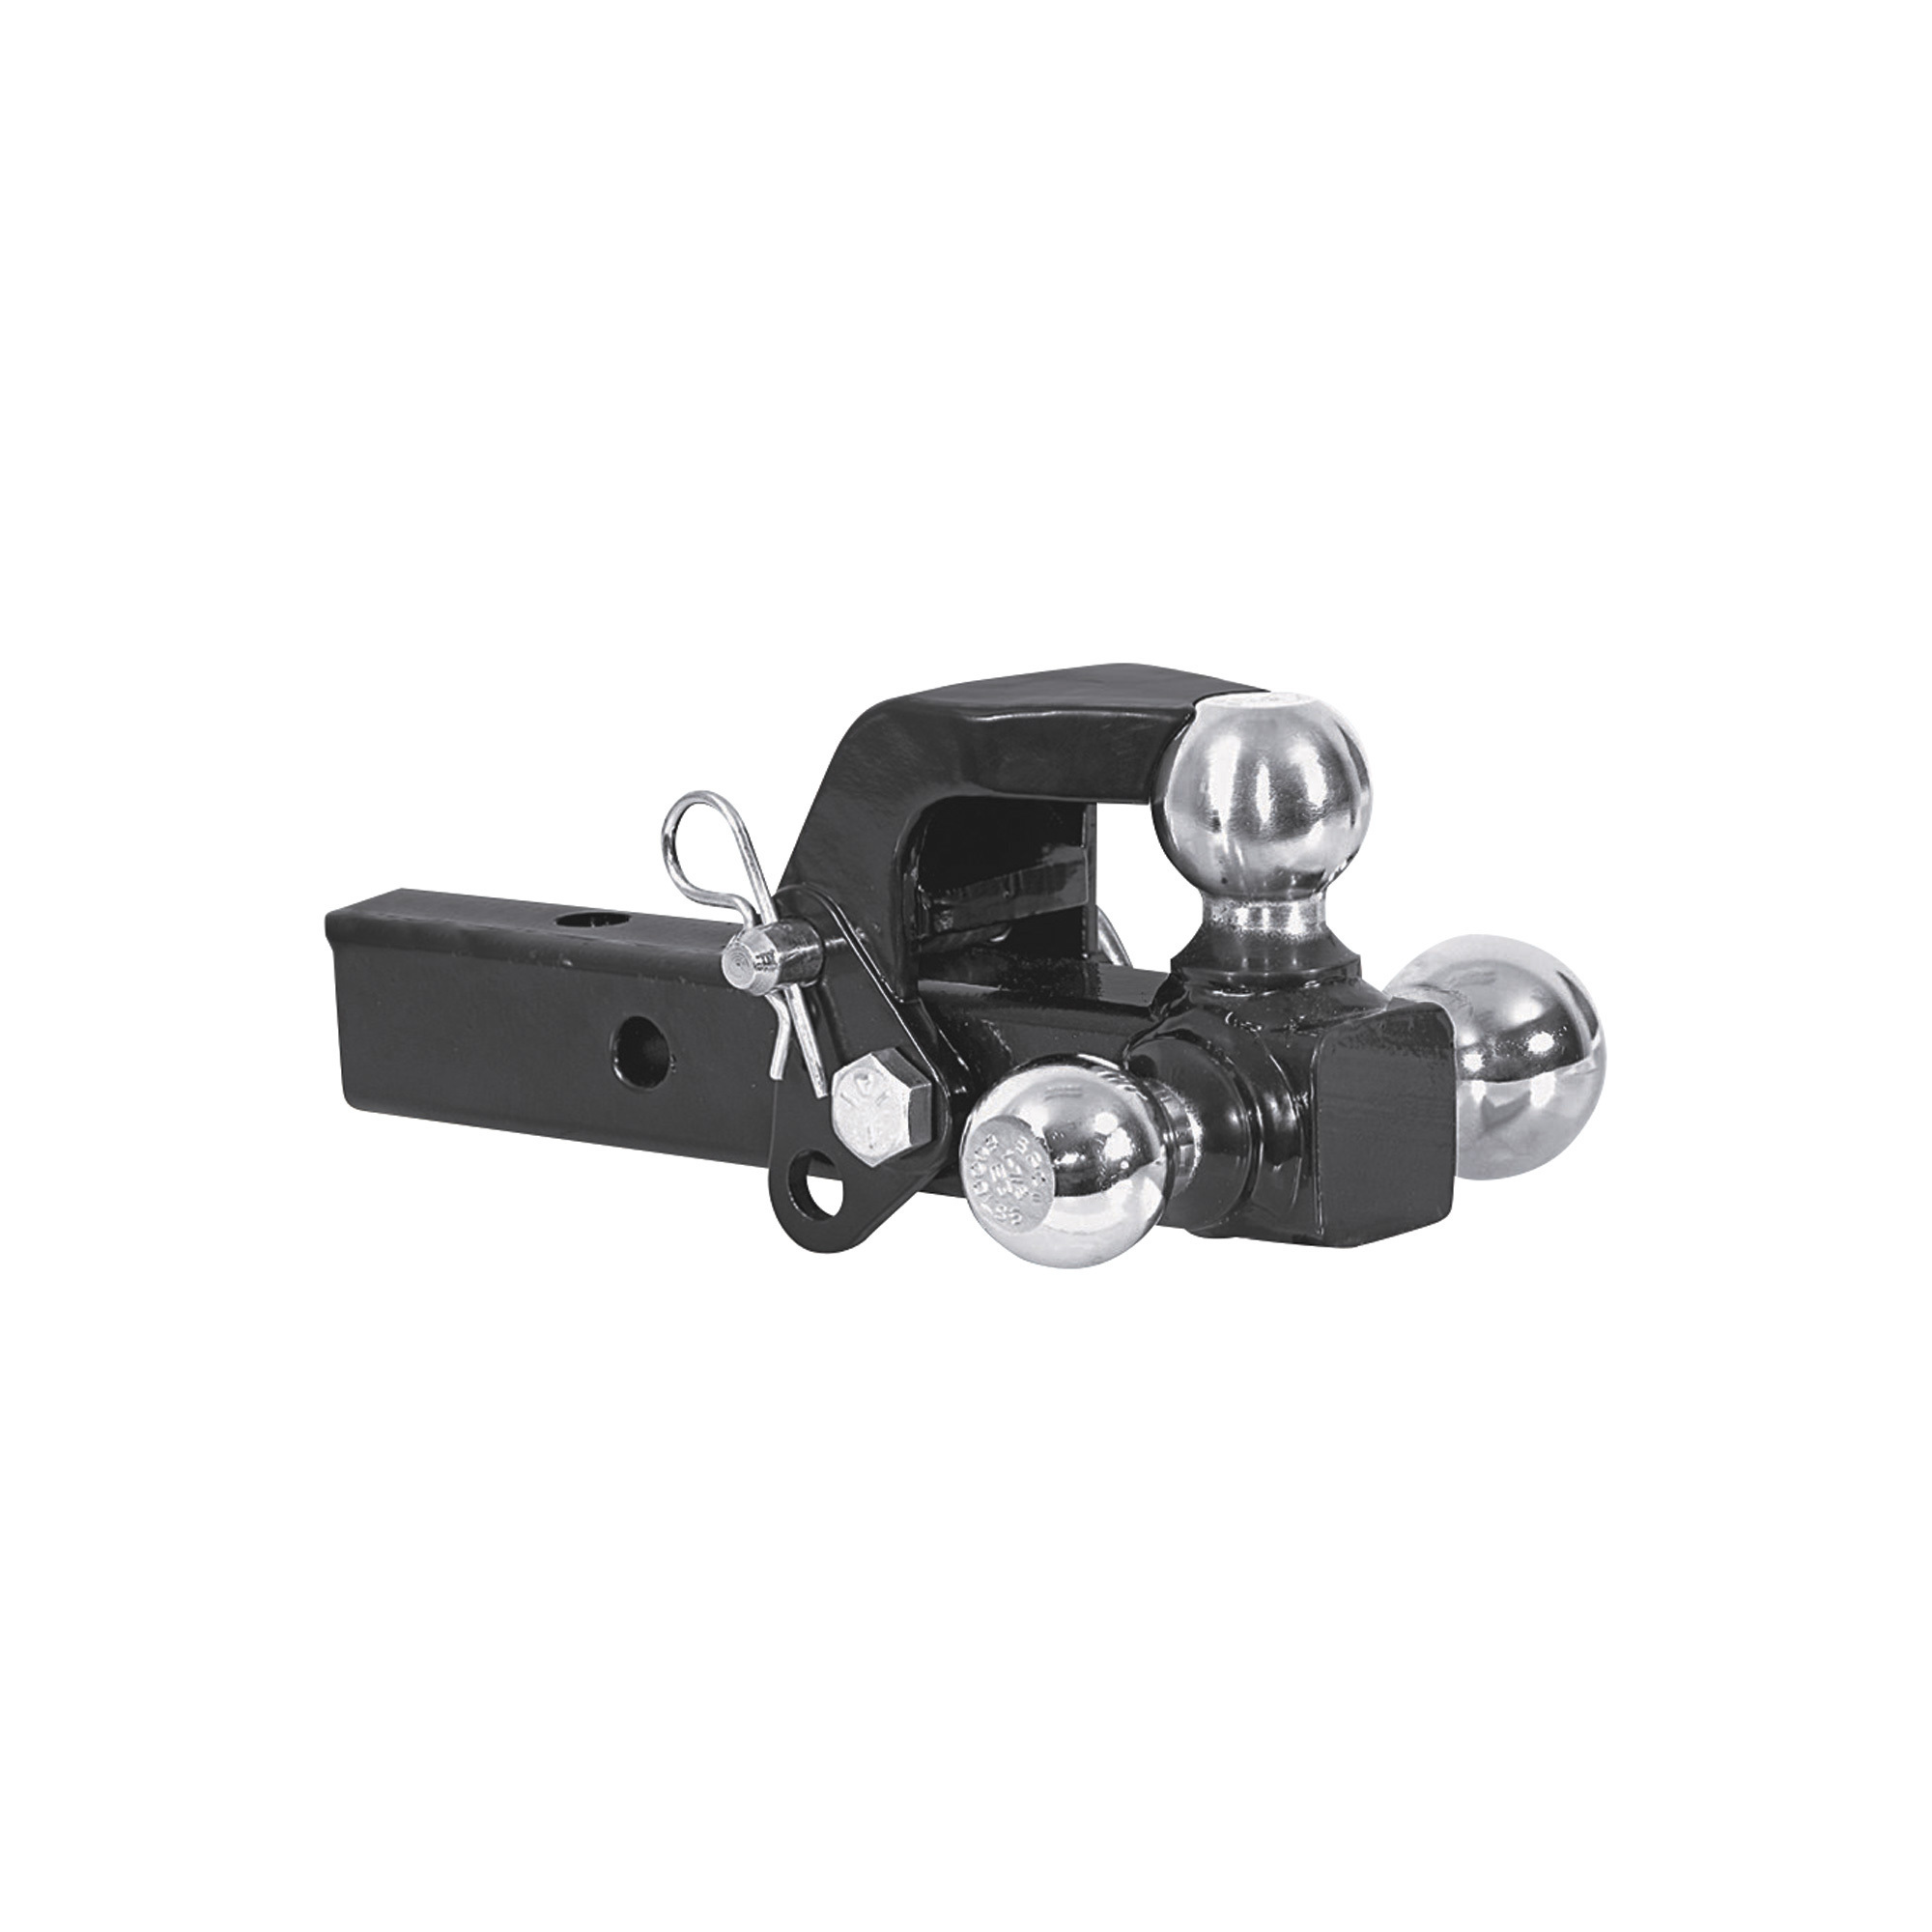 Ultra-Tow Tri-Ball Hitch with Pintle, Chrome